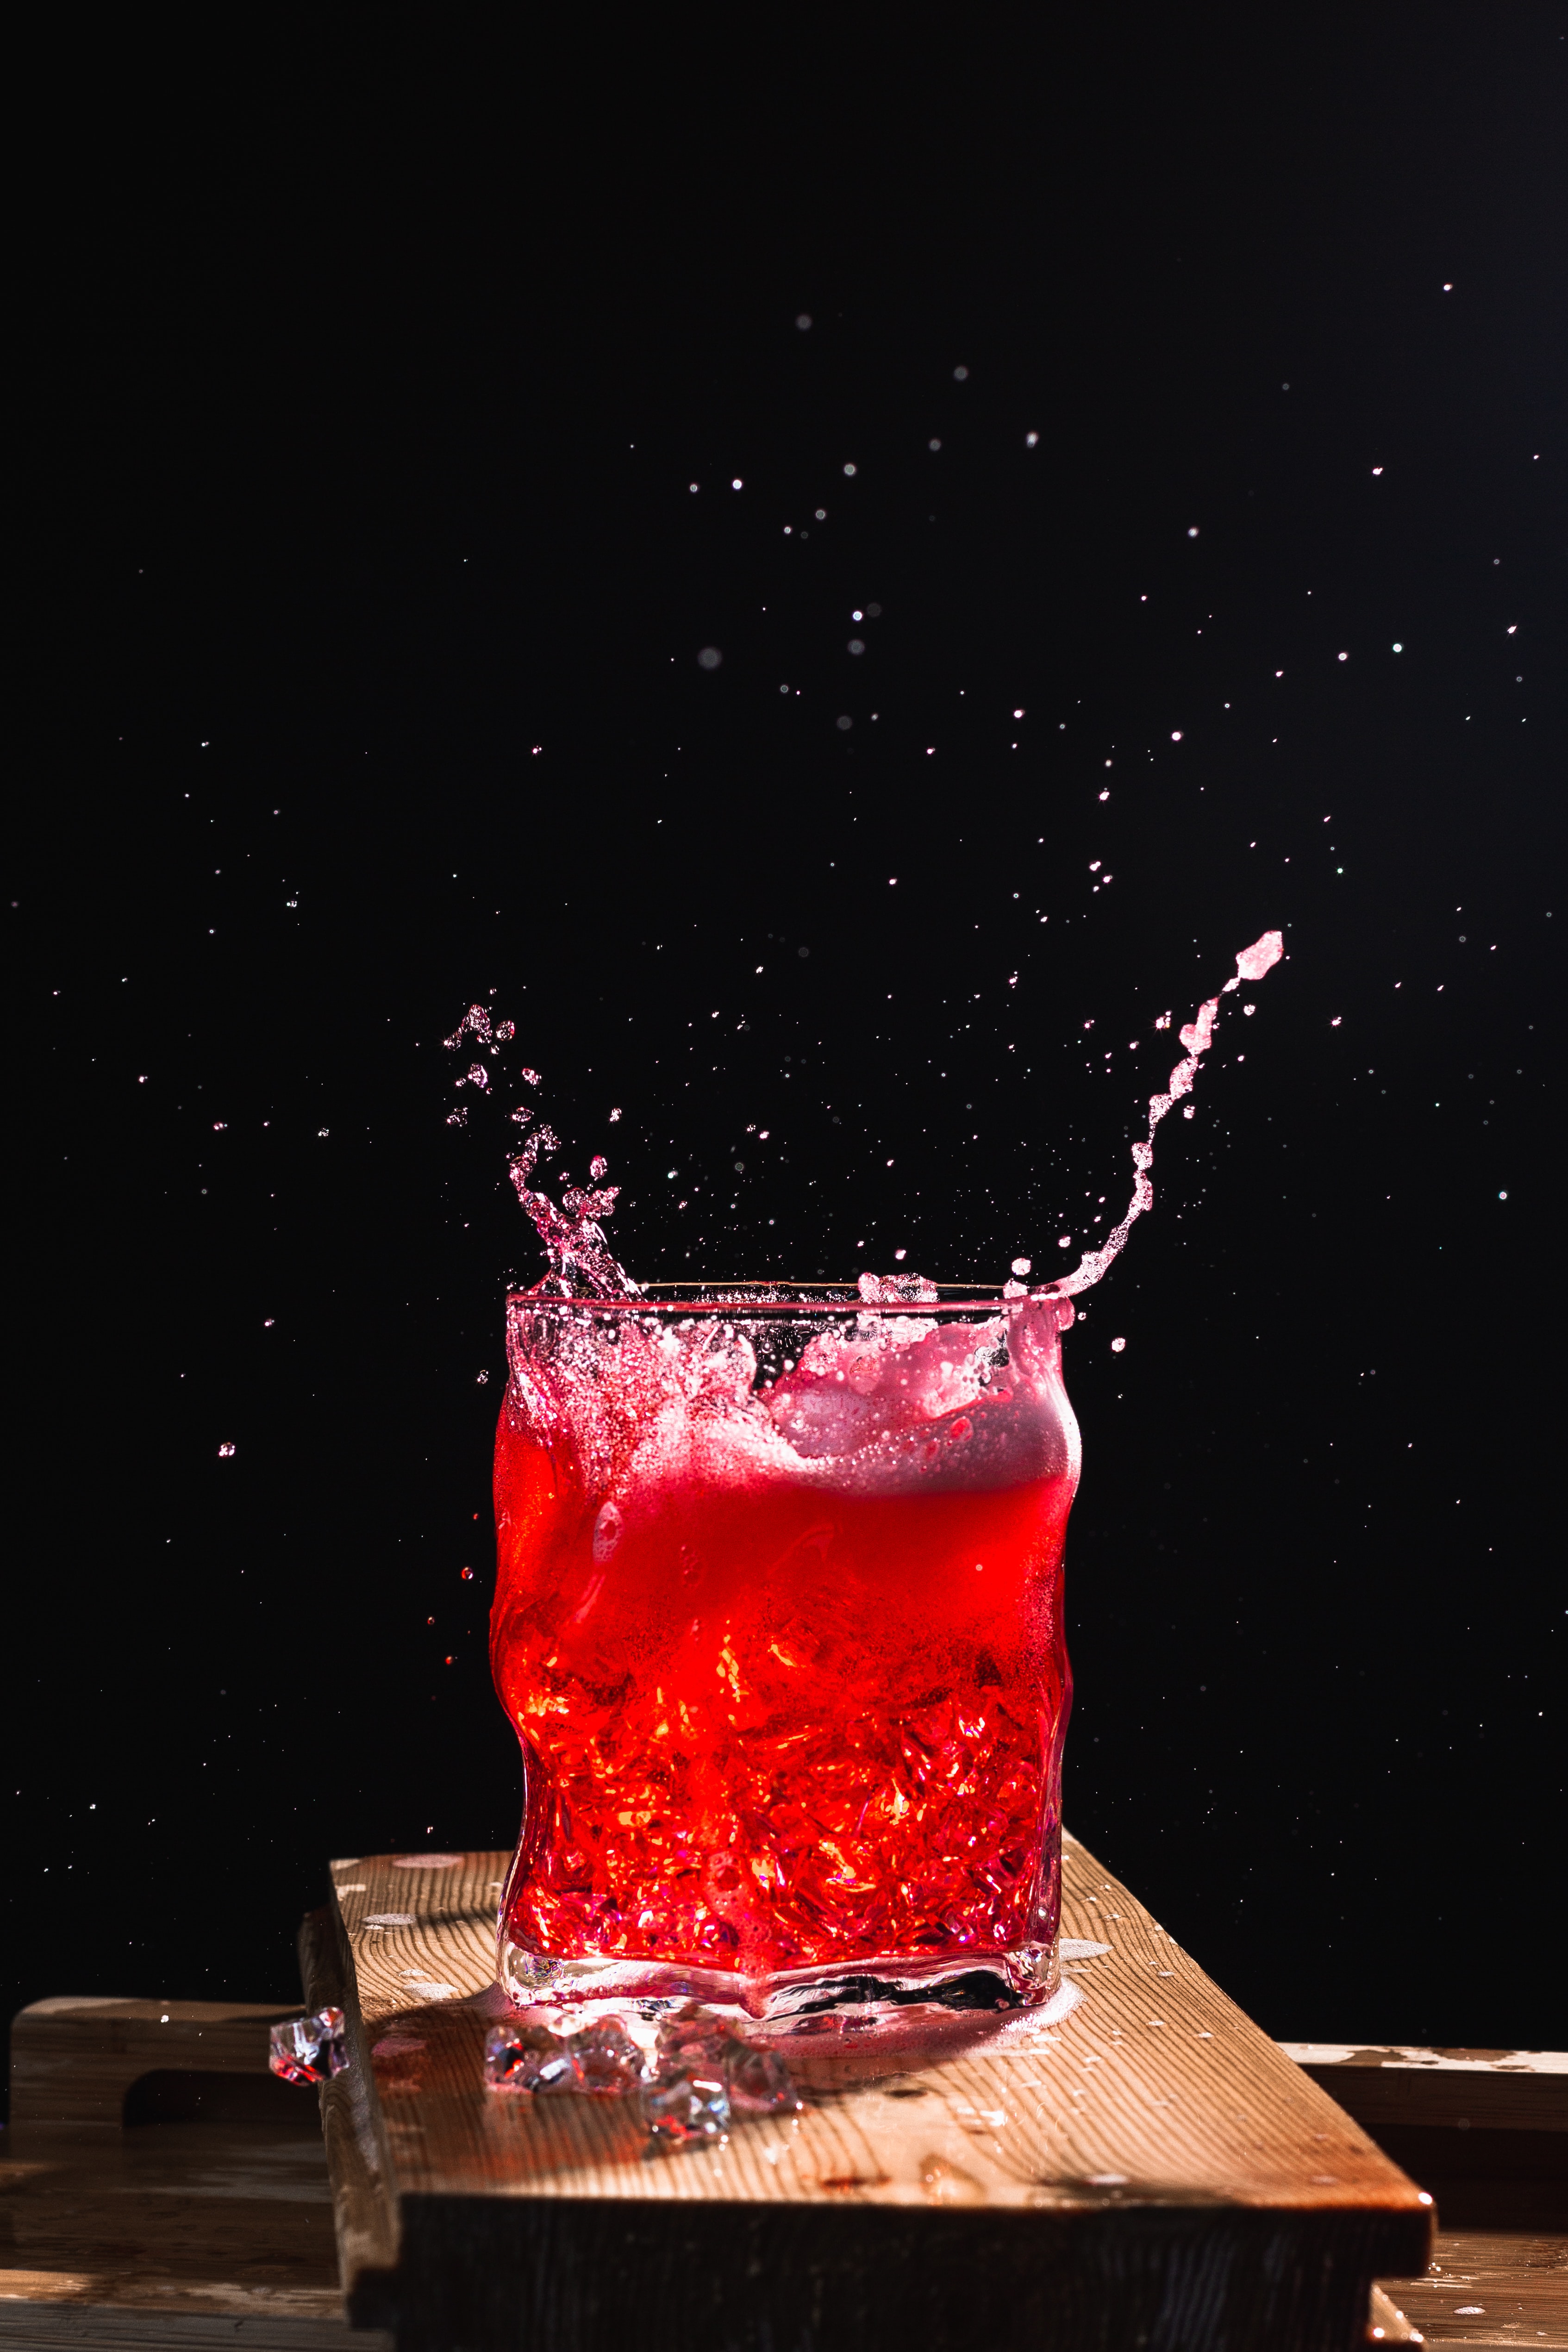 1080p Drink Hd Images